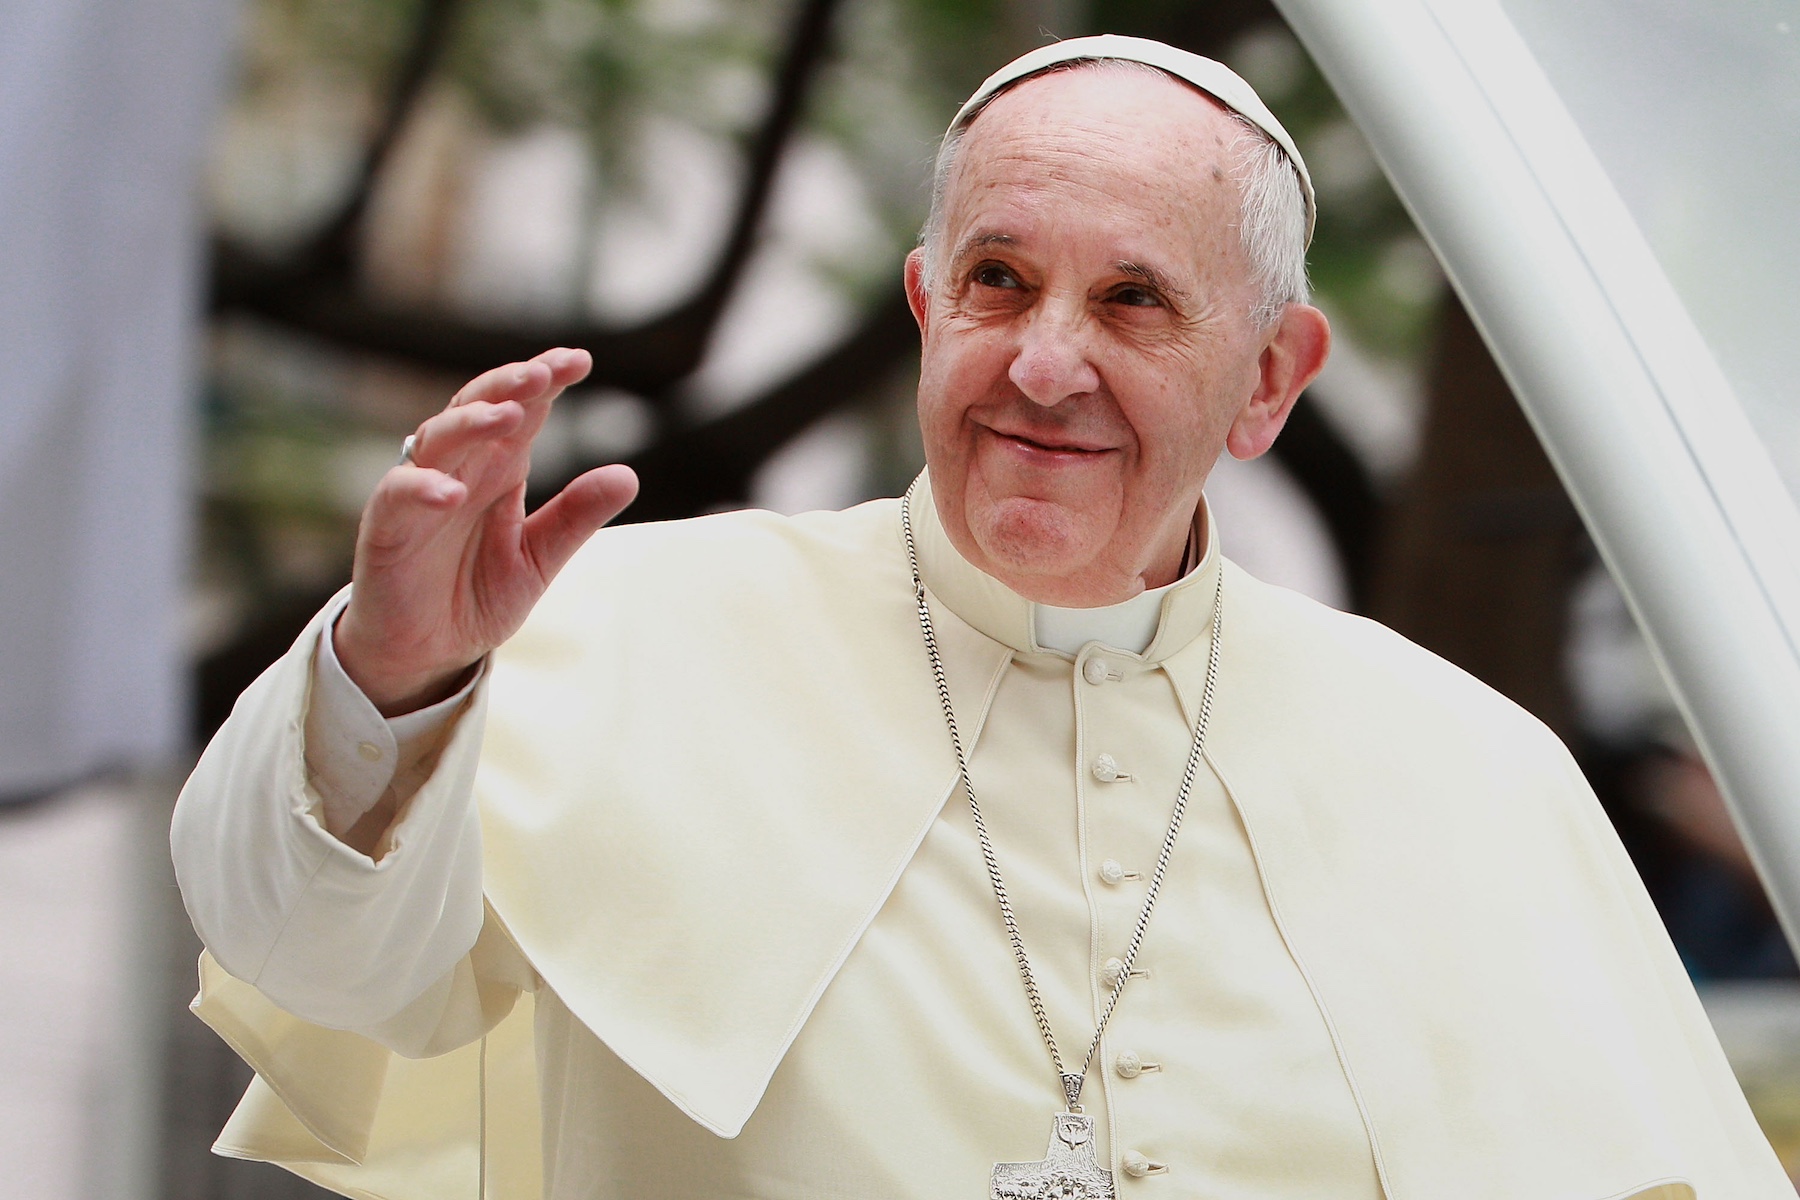 Pope Francis visit venues across Leyte and Manila